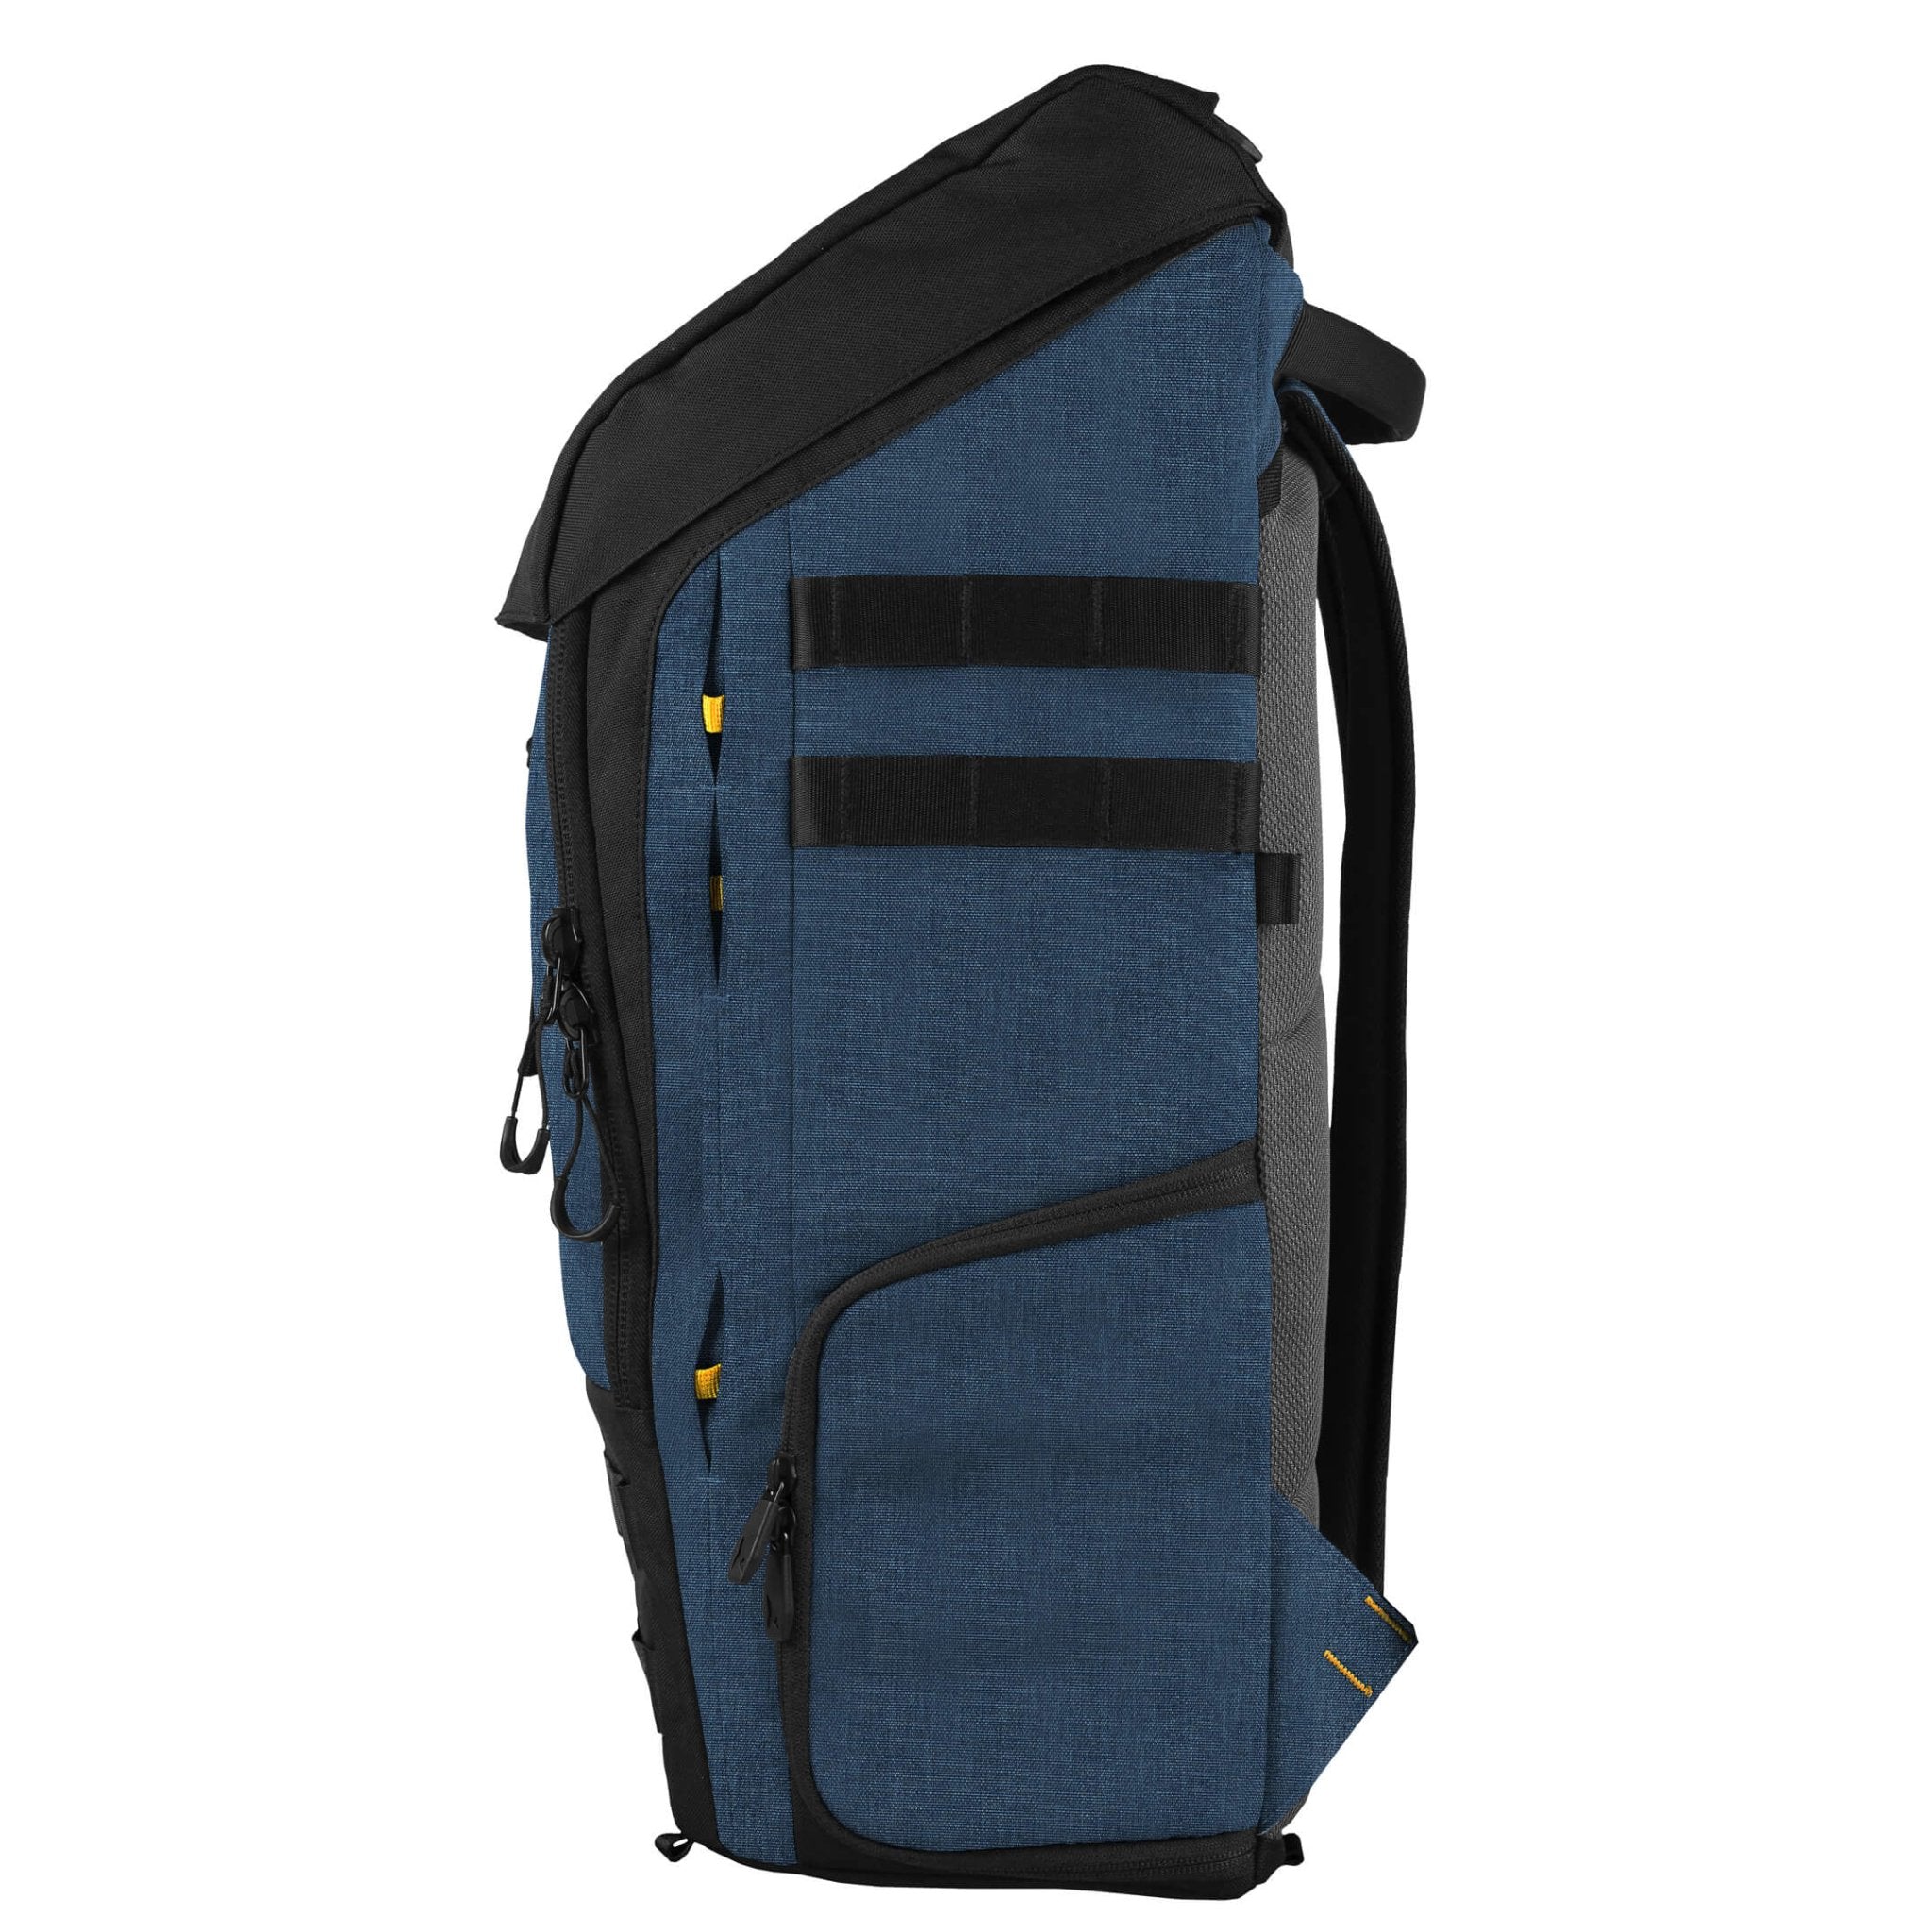 Torvol Urban Carrier Backpack - Your All-Round Freestyle Backpack 12 - Torvol - Drone Authority